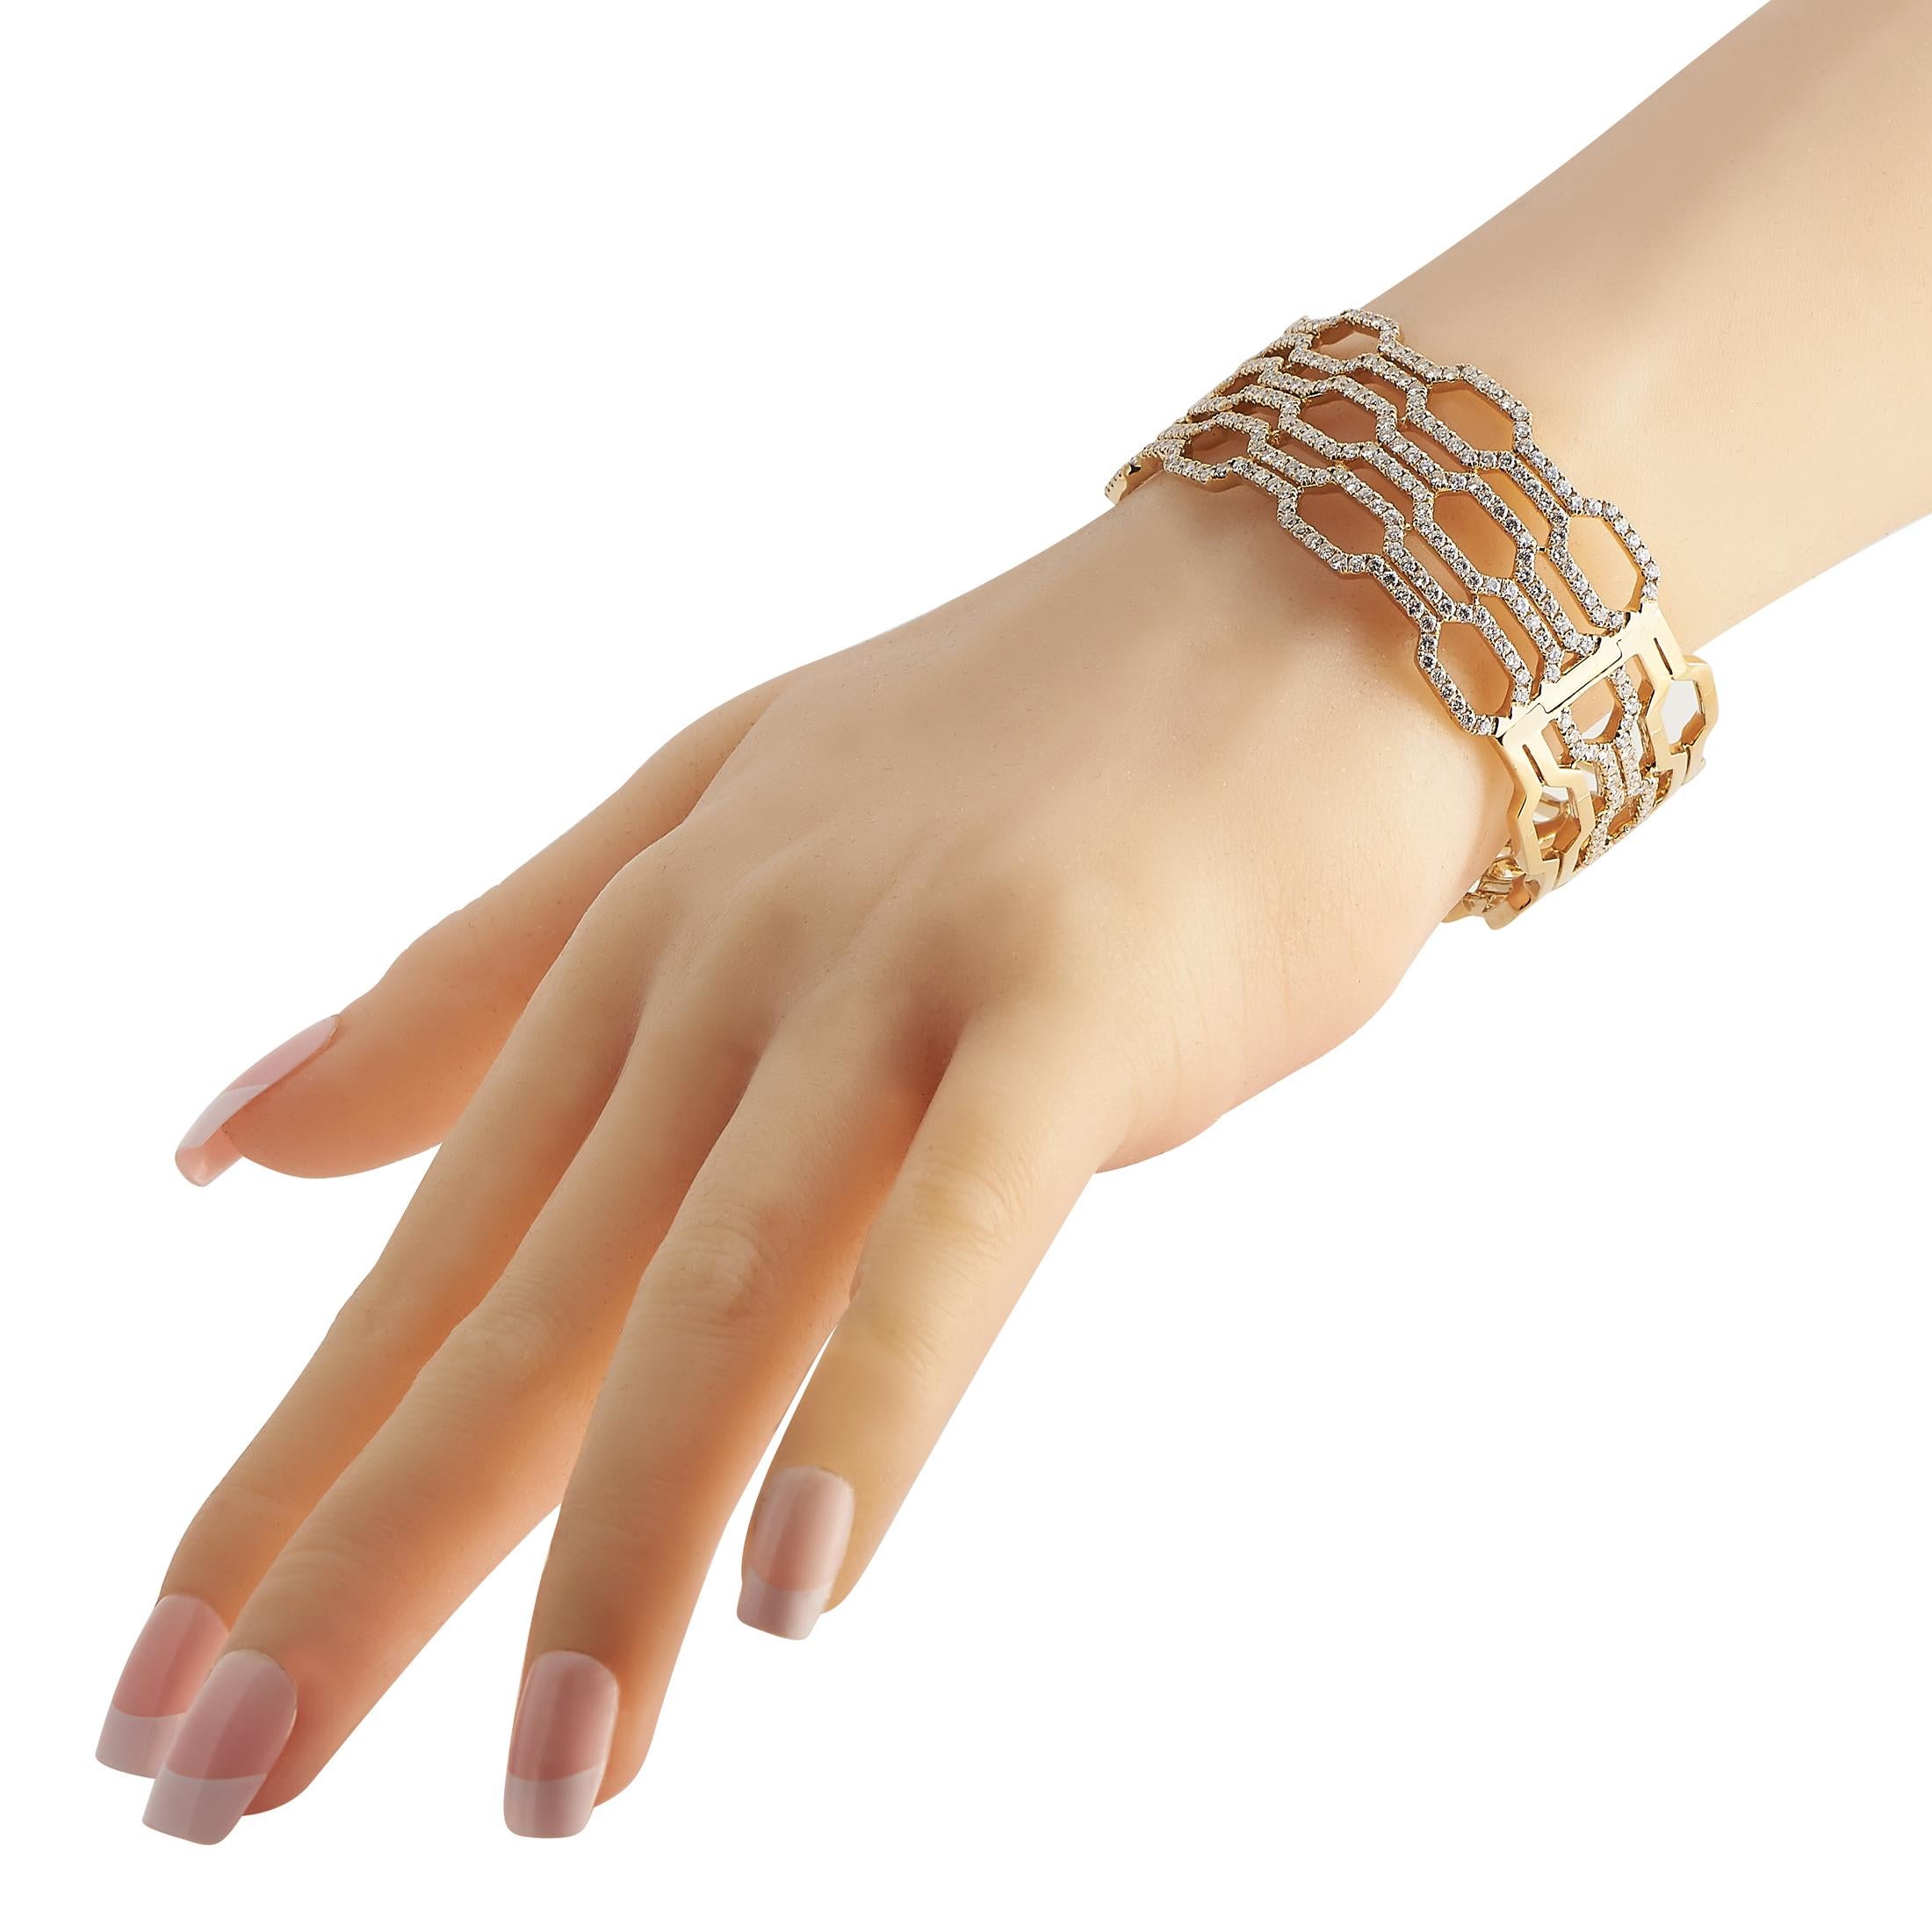 Shape up your style with the edgy elegance of this geometric jewelry. This LB Exclusive bracelet comes in 18K yellow gold and features a wide, openwork bangle bracelet design with hexagonal links traced with round, brilliant diamonds. Whether worn